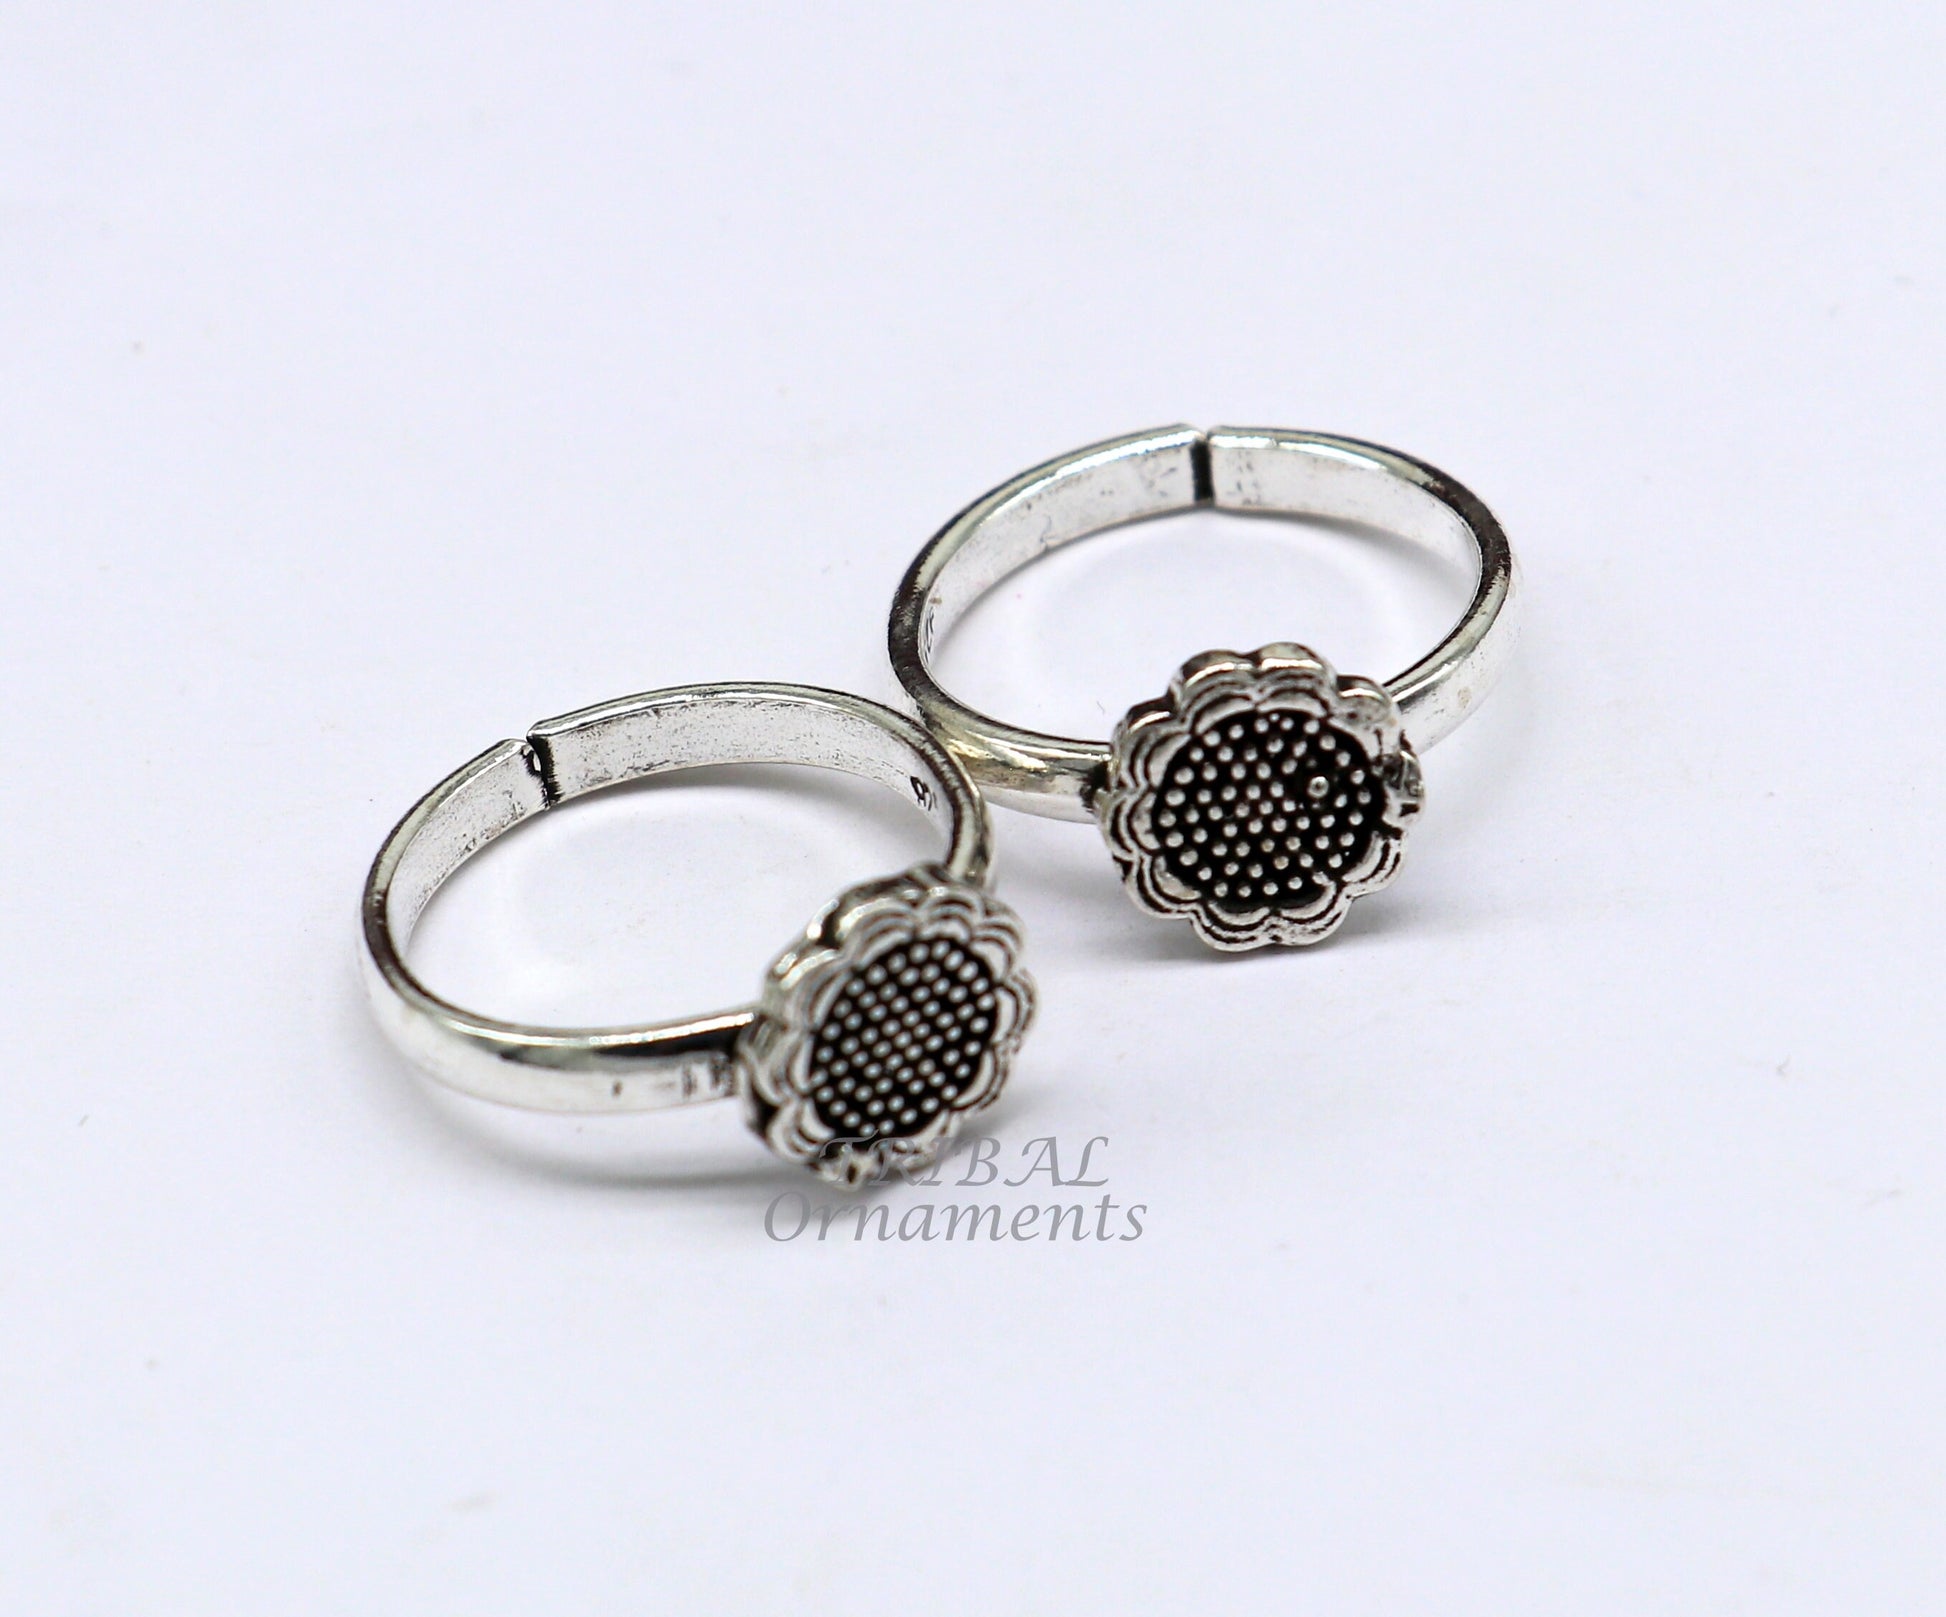 925 sterling silver handmade unique classical stylish vintage tribal ethnic toe ring best brides gifting jewelry ytr68 - TRIBAL ORNAMENTS